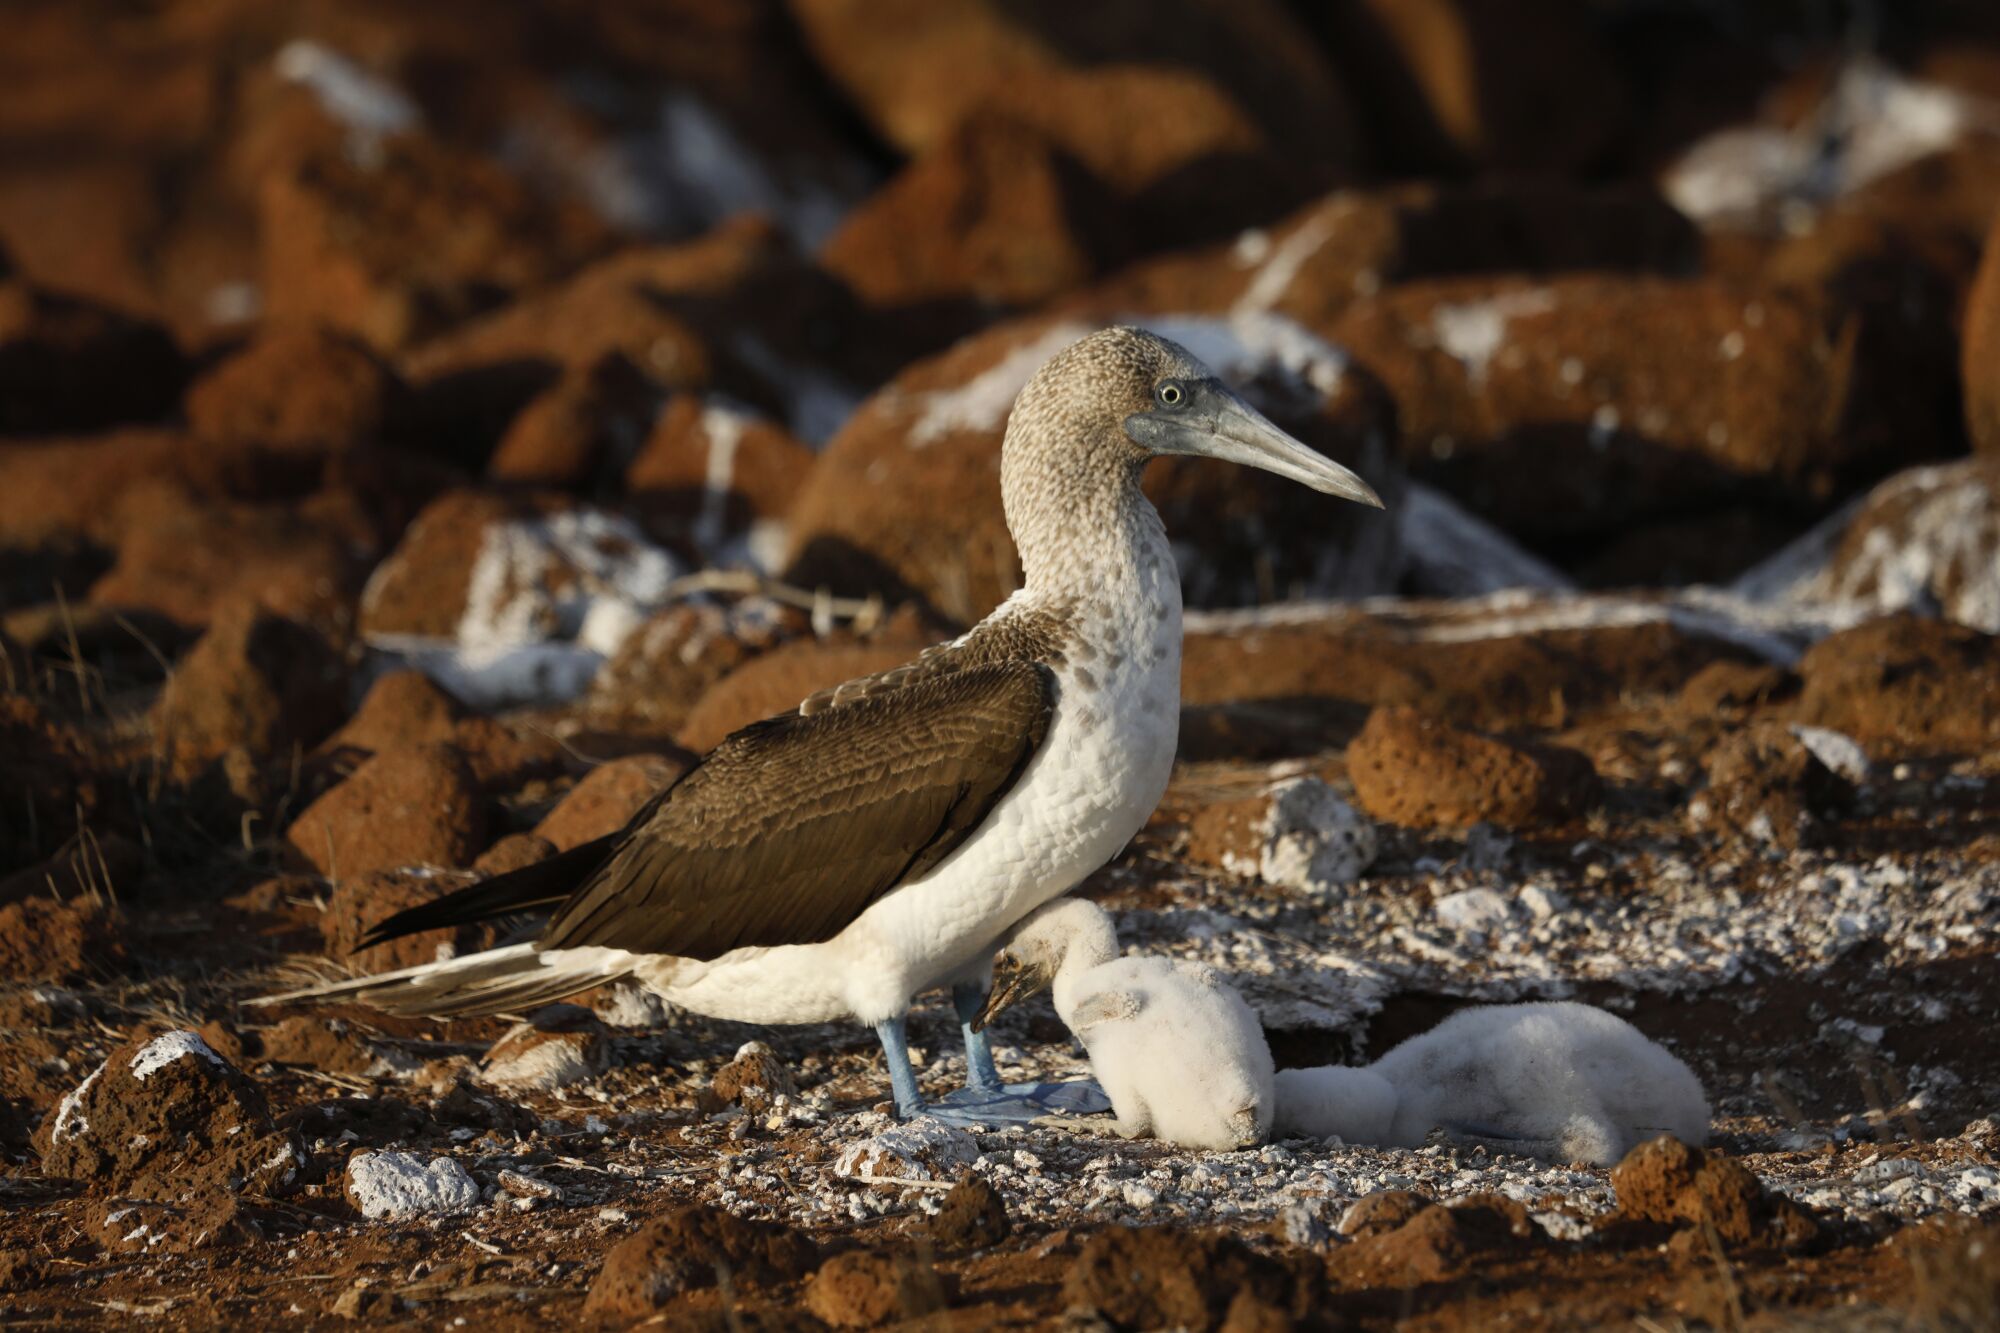 A blue-footed booby tends to her chicks on North Seymour Island in the Galapagos.